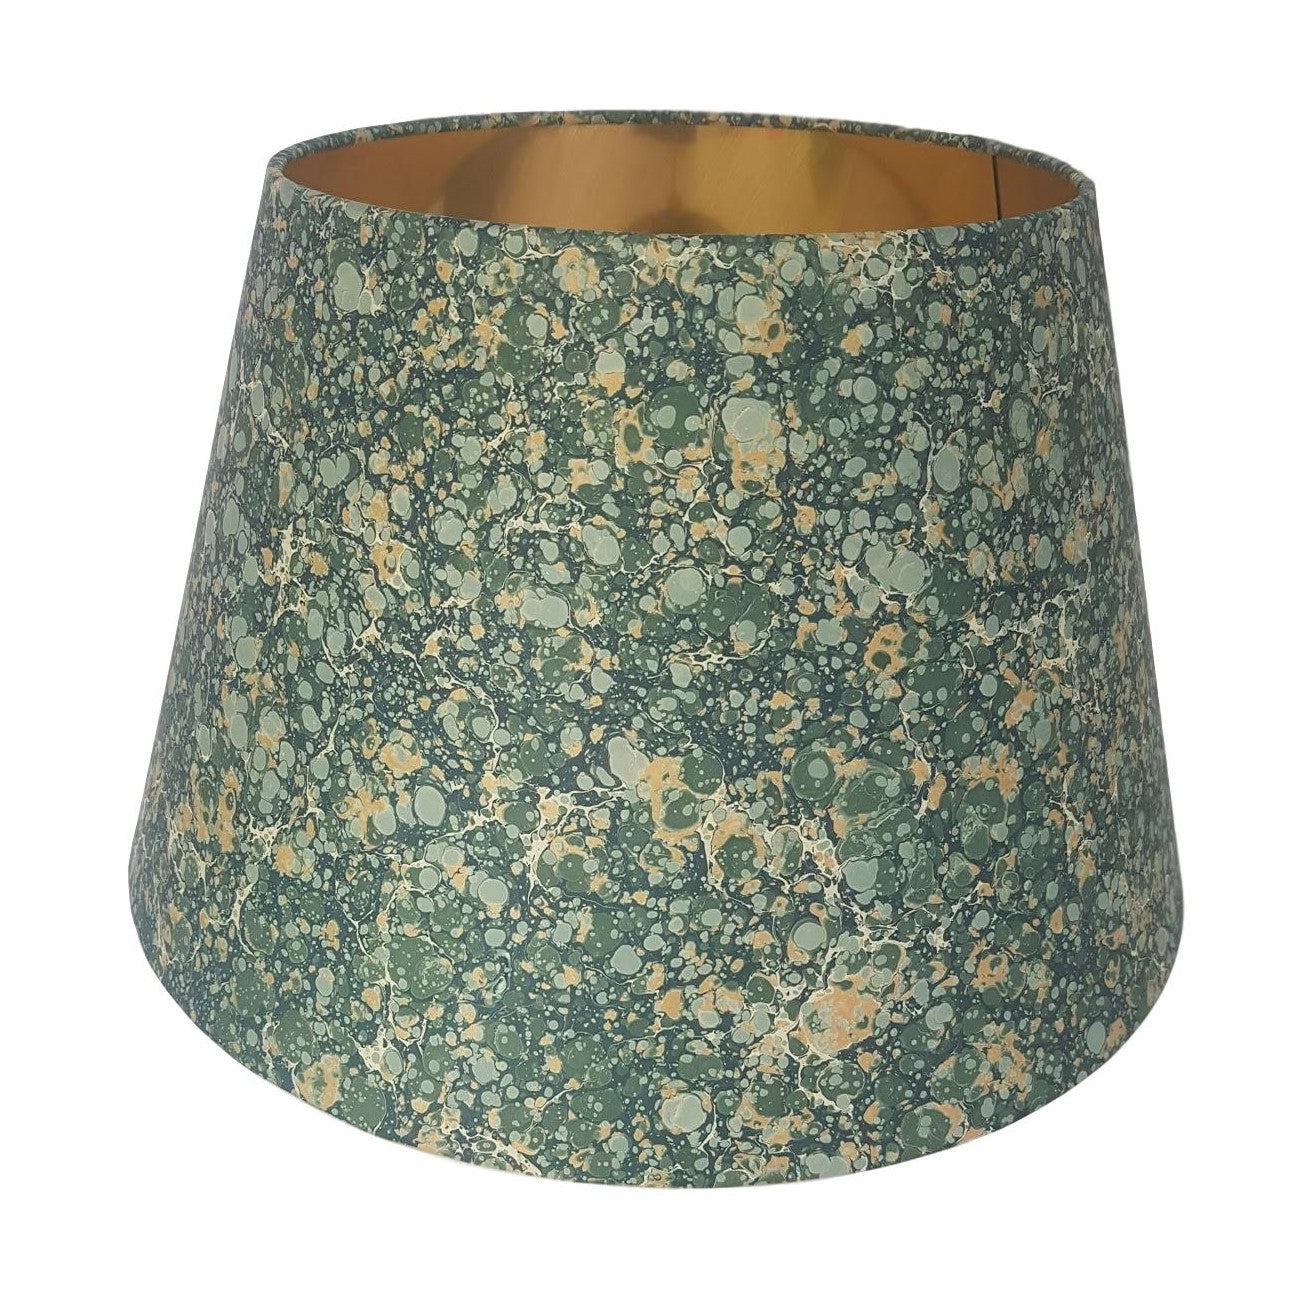 Munro and Kerr green and gold marbled paper for an empire lampshade